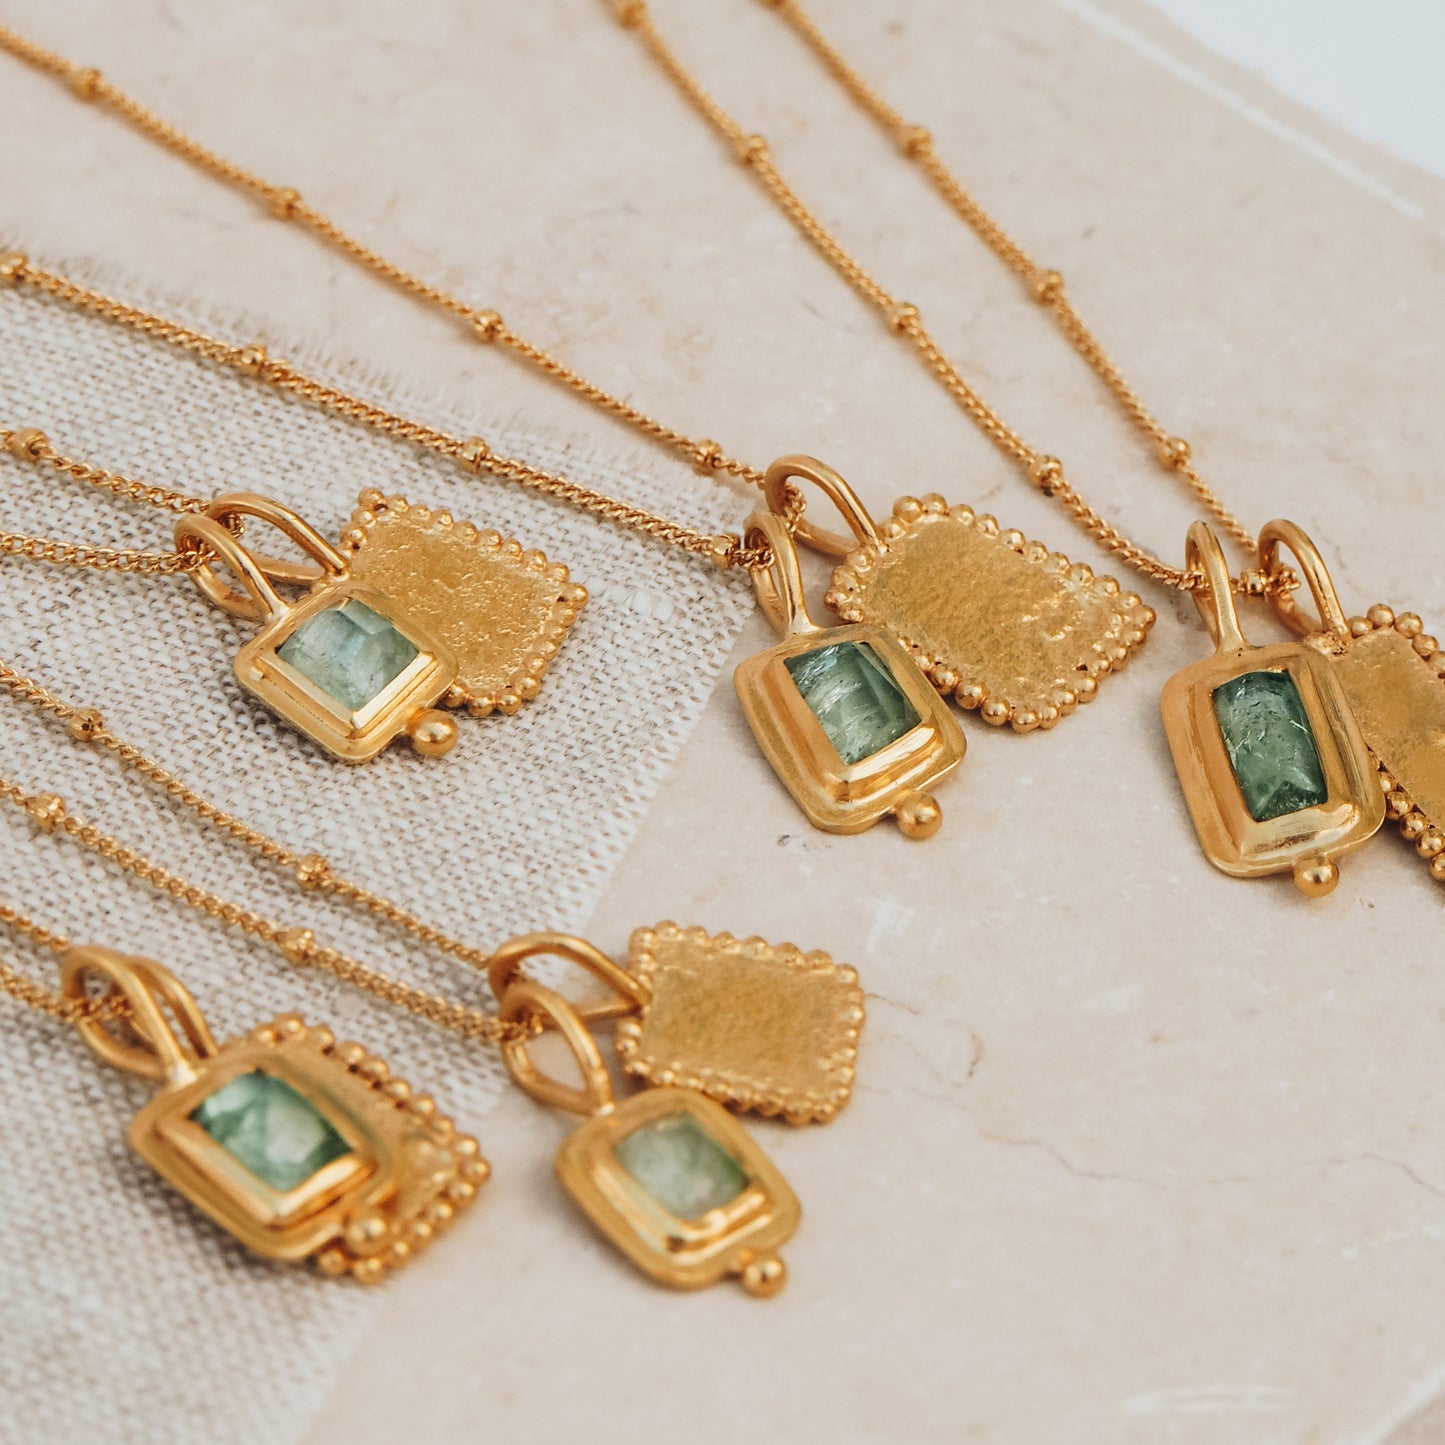 Group of exquisite rich gold necklaces featuring square pendants, captivating ocean blue rose cut tourmaline gemstones, textured surfaces, and meticulous granulation work.